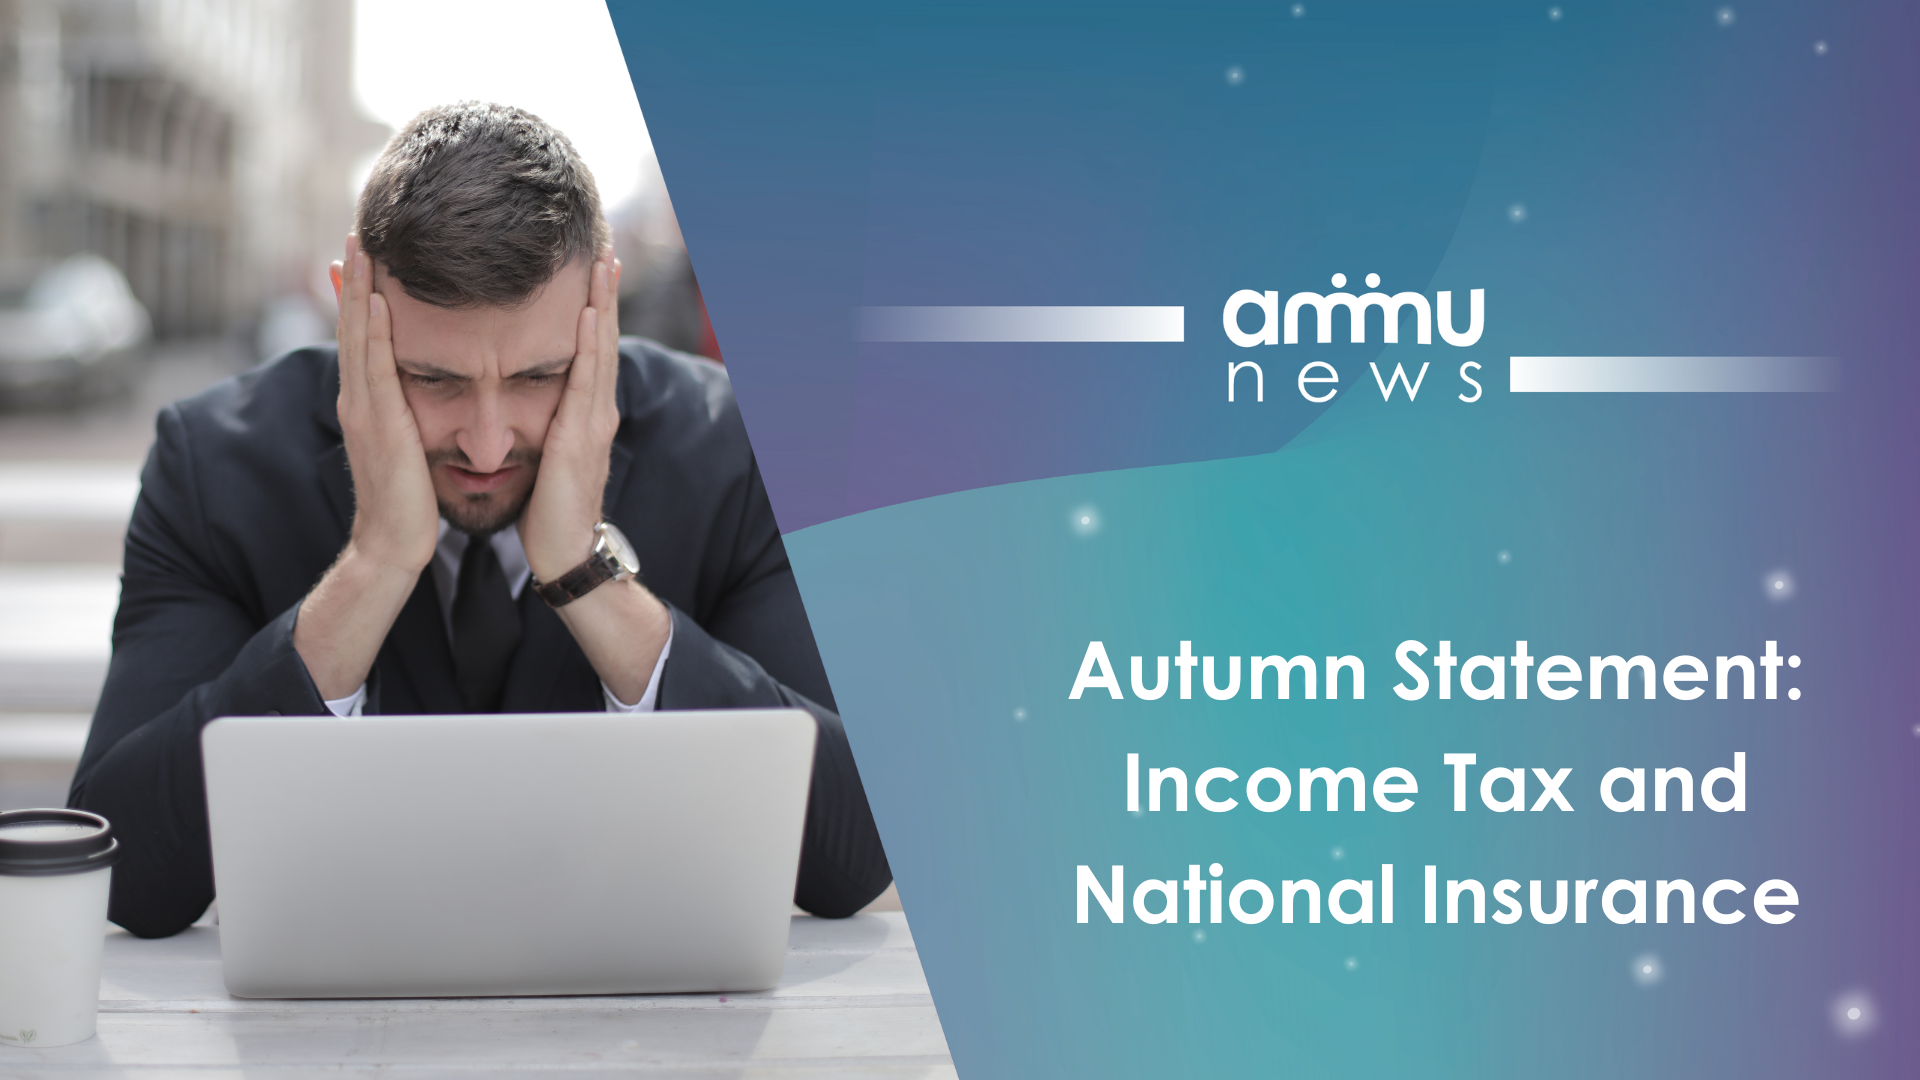 Autumn Statement: Income Tax and National Insurance